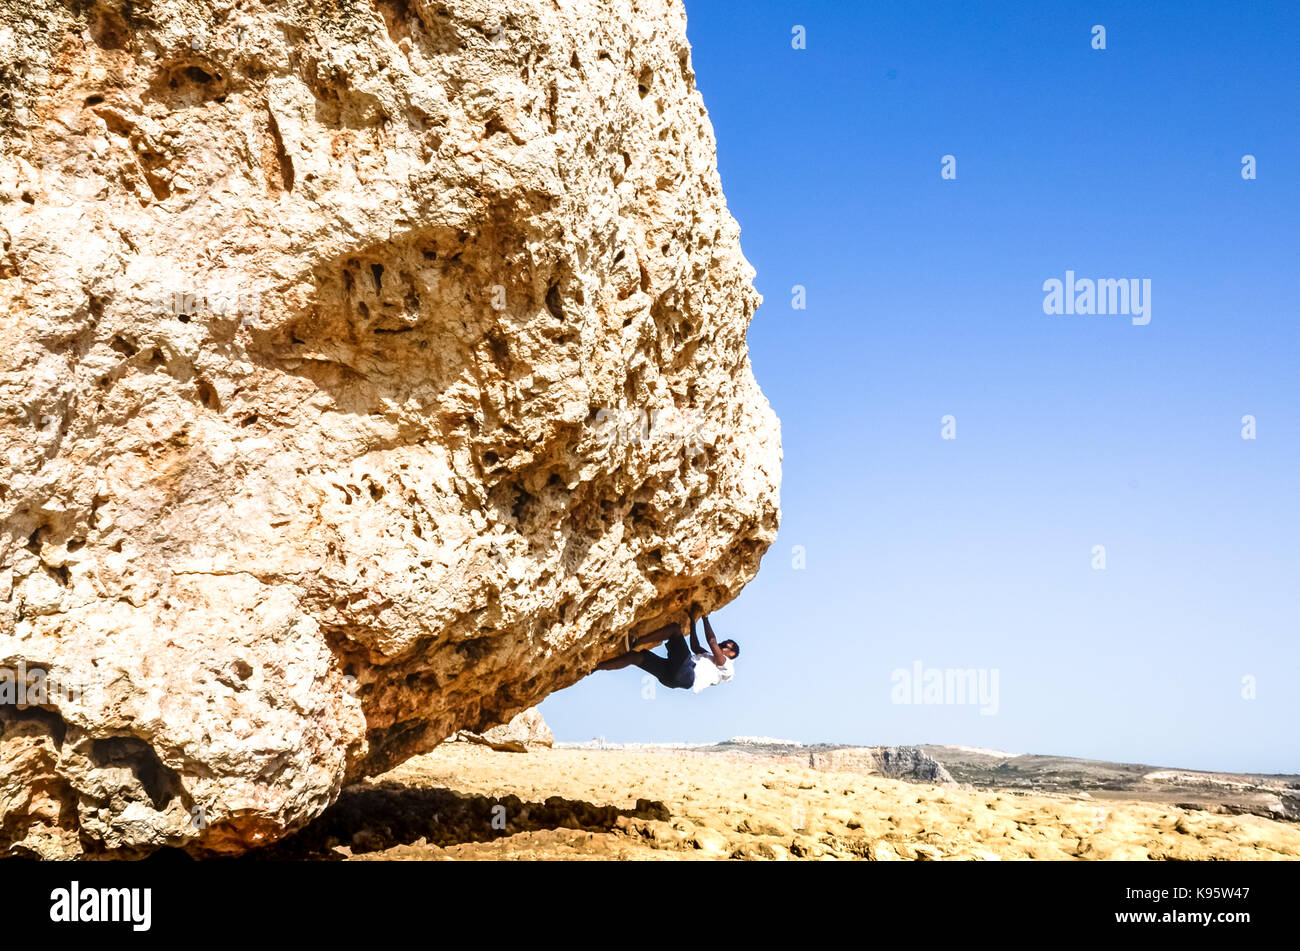 'Give me a challenge and I'll meet it with joy.' A man climbs a giant rock in the rugged Mediterranean terrain in Malta Stock Photo